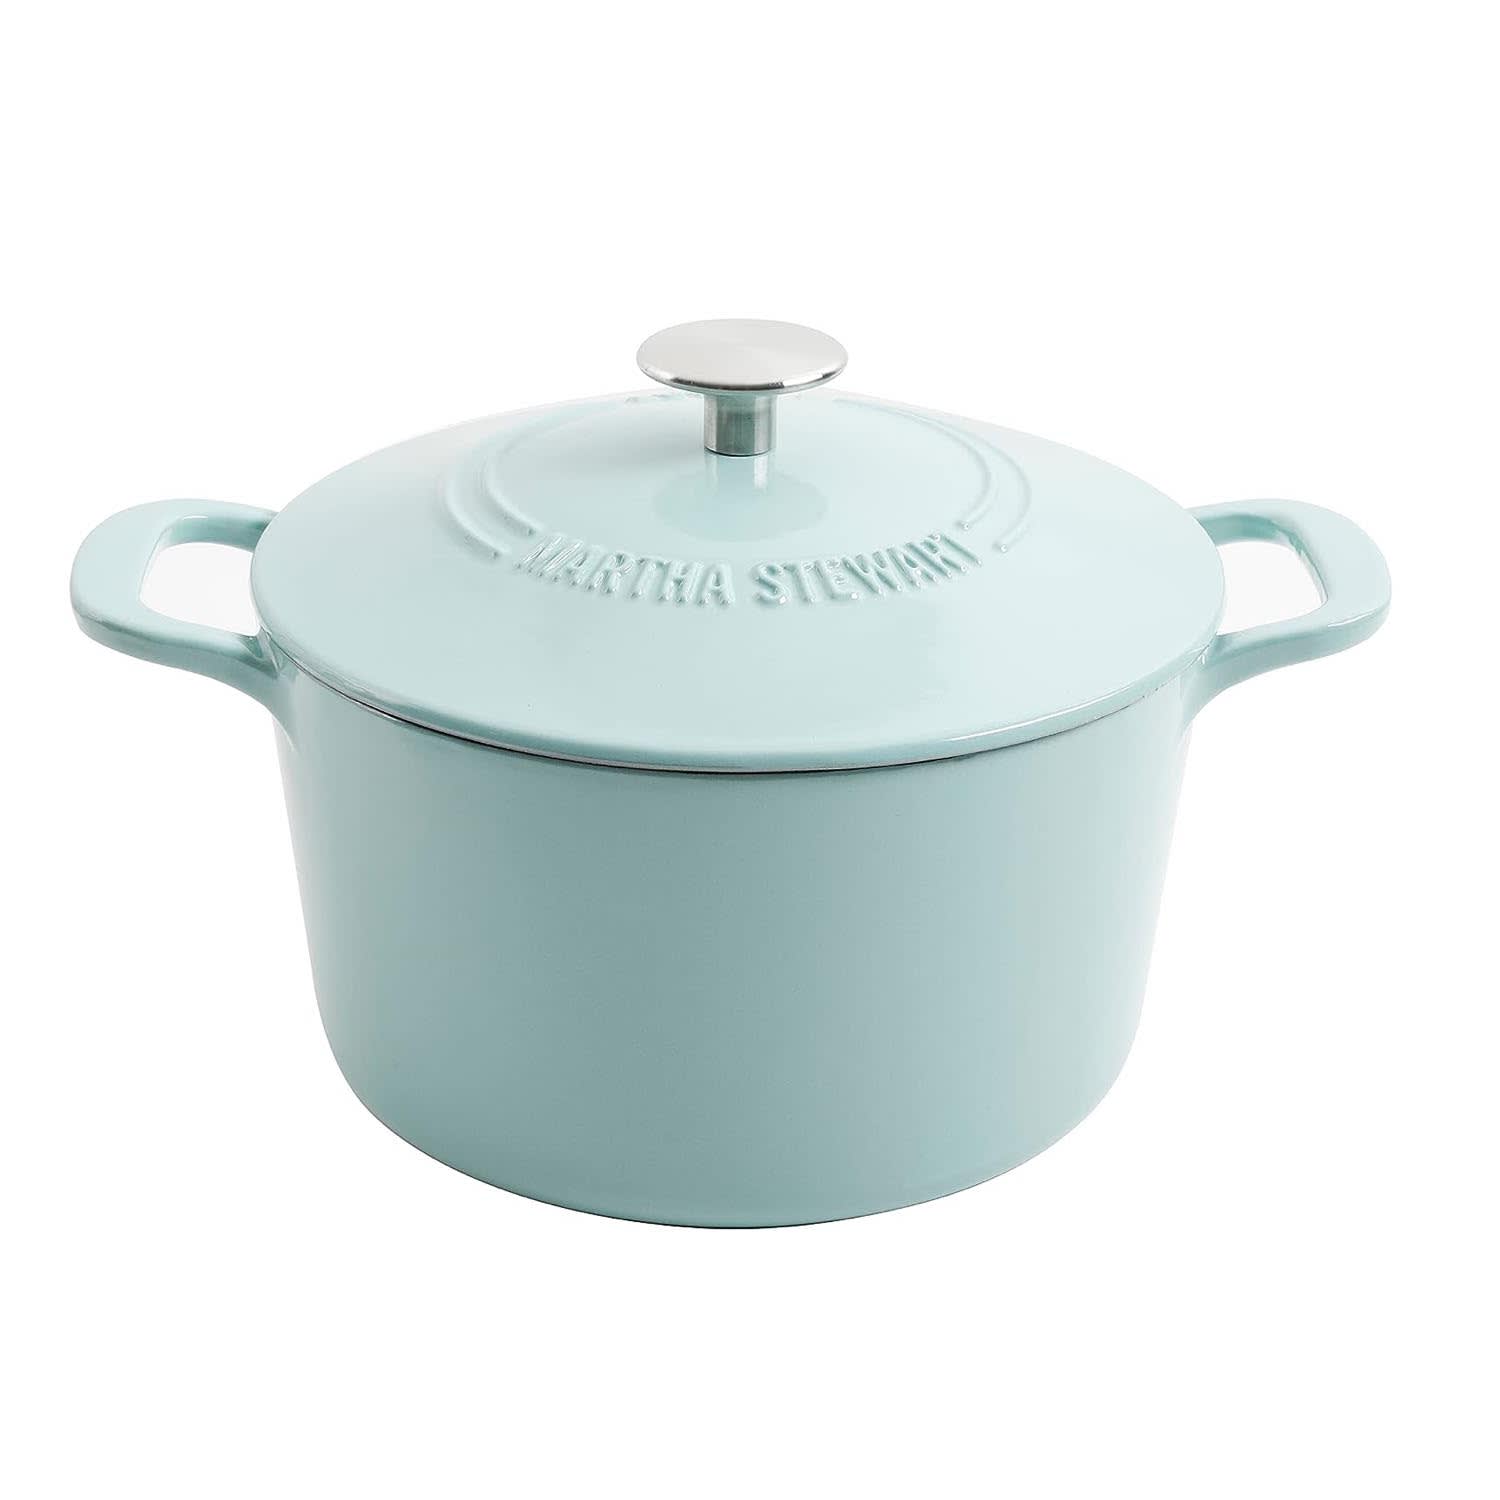 Martha Stewart Dutch Oven Review - Is It Worth A Buy?